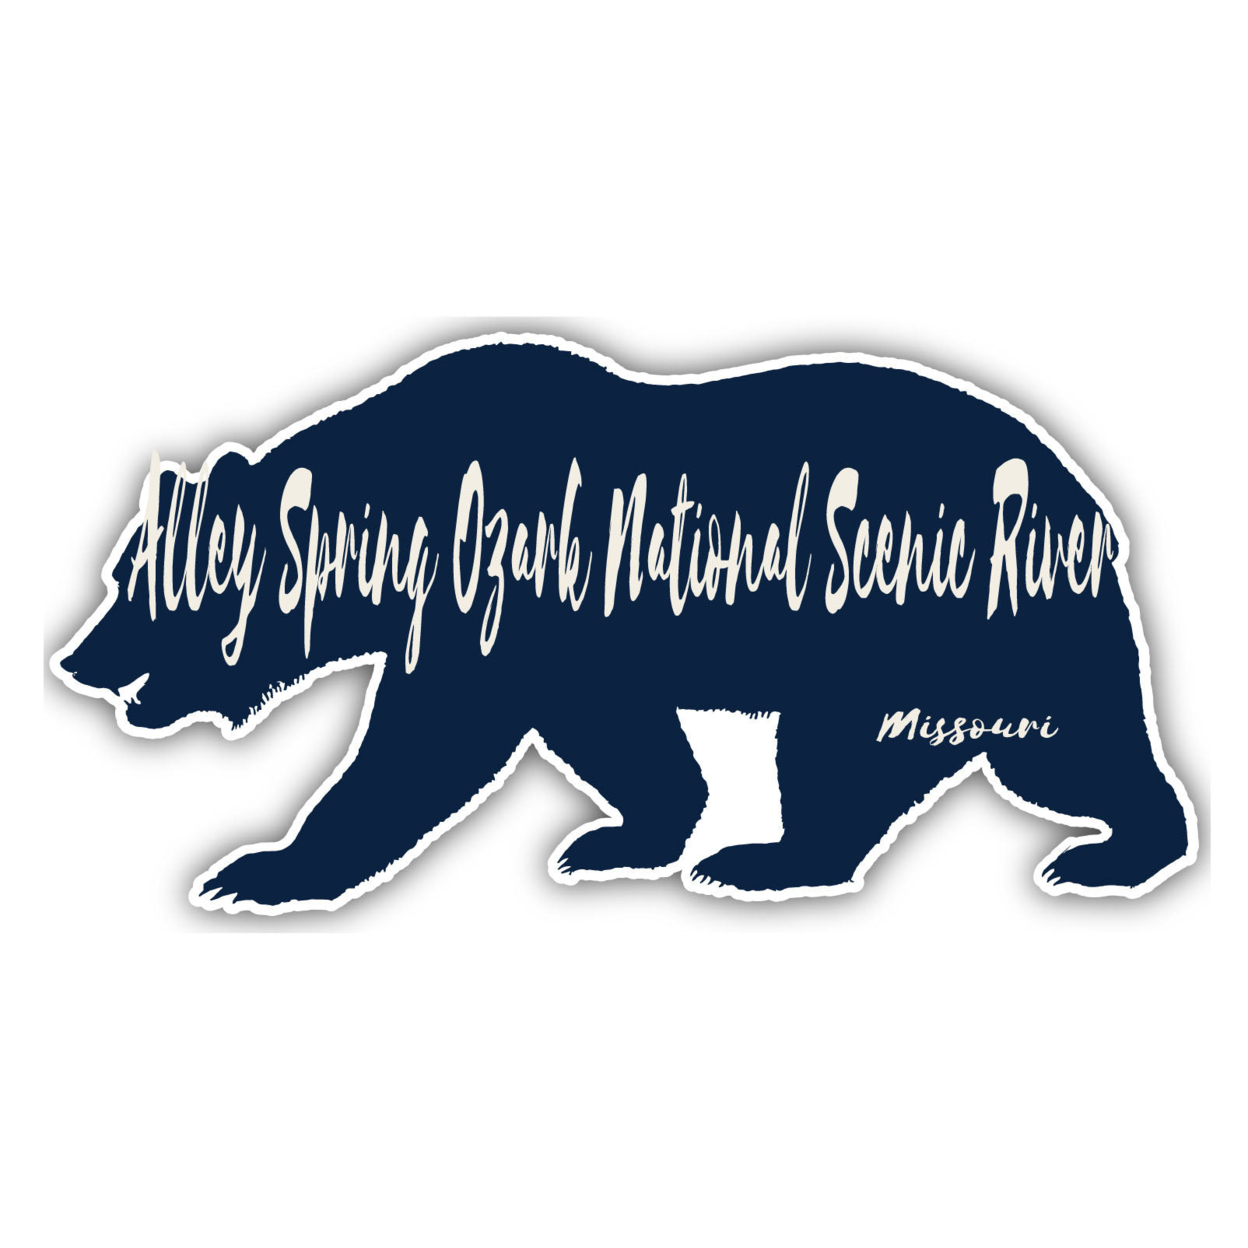 Alley Spring Ozark National Scenic River Missouri Souvenir Decorative Stickers (Choose Theme And Size) - 4-Pack, 8-Inch, Bear